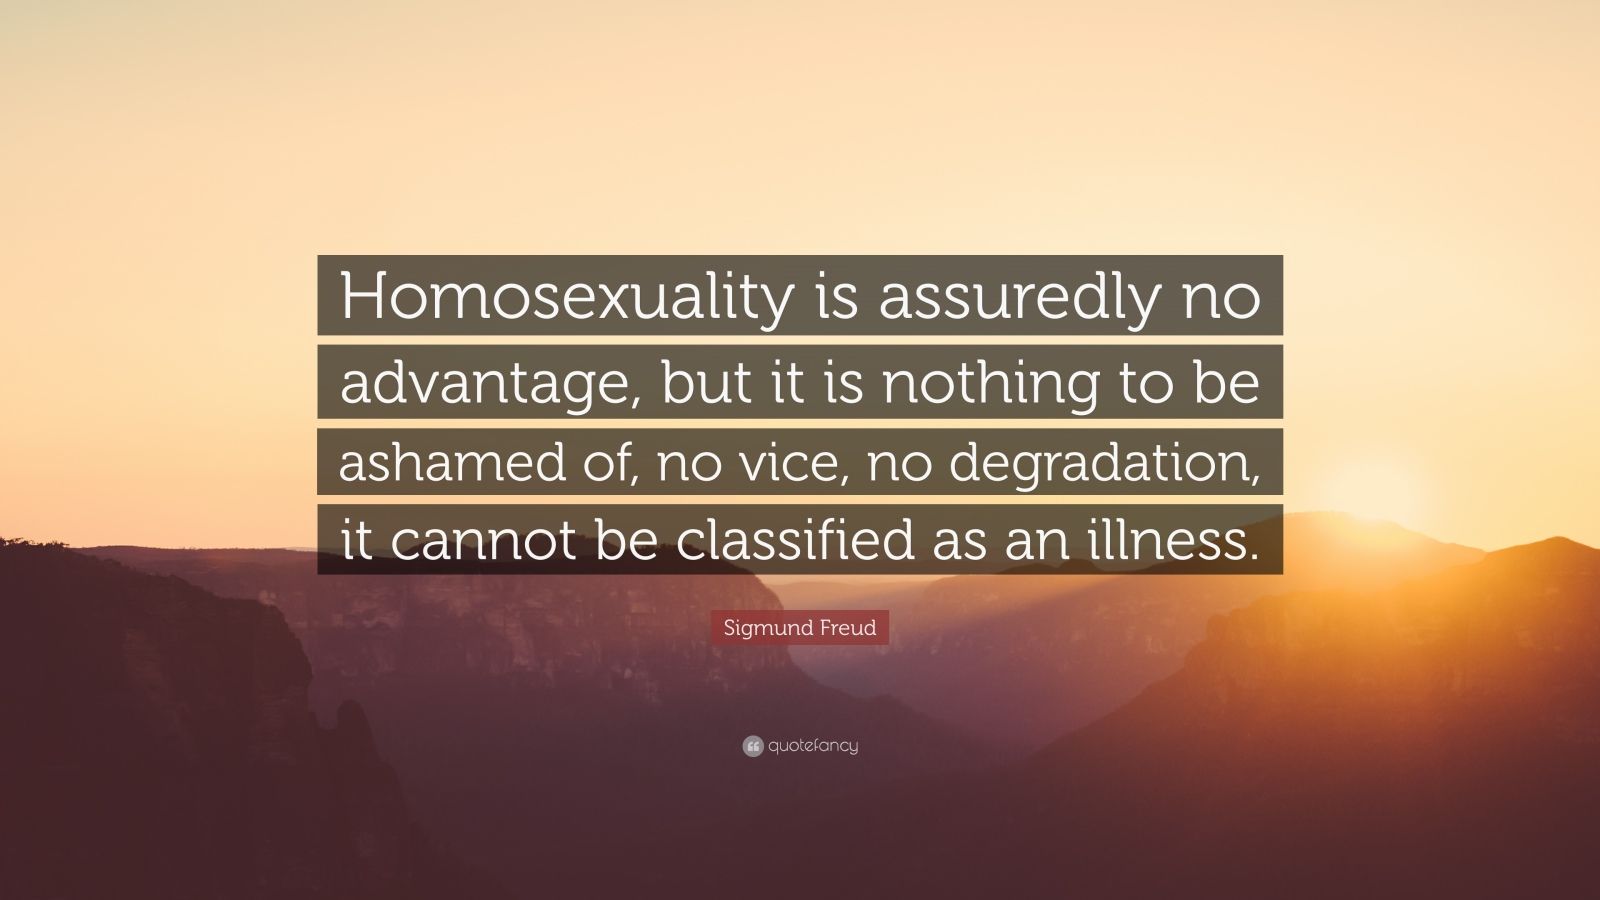 Sigmund Freud Quote “homosexuality Is Assuredly No Advantage But It Is Nothing To Be Ashamed